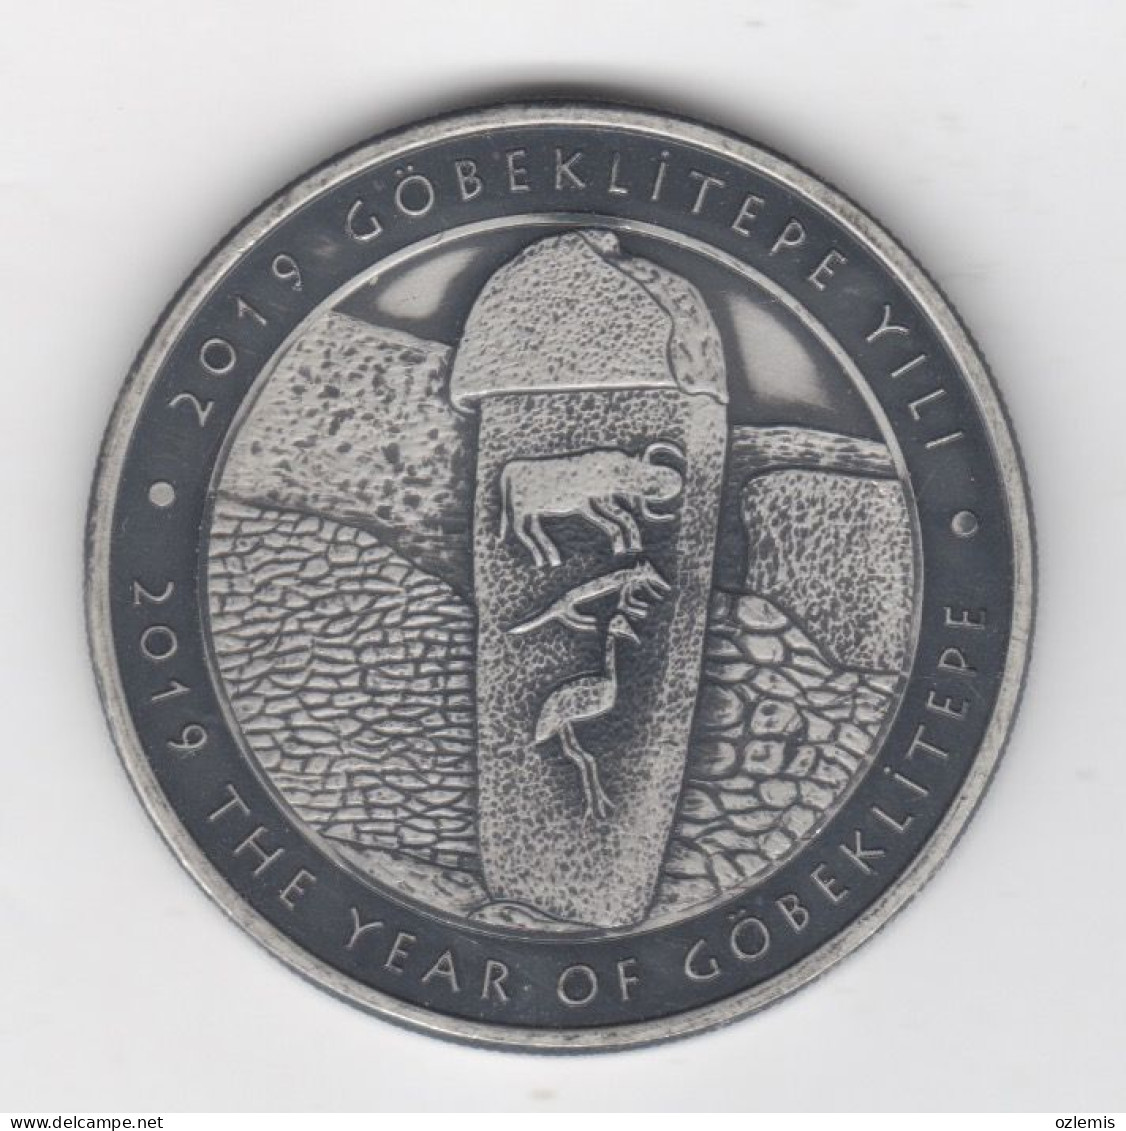 THE YEAR OF GOBEKLITEPE URFA COMMEMORATIVE OXIDE SILVER COIN ,2019  ,TURKEY - Turquie